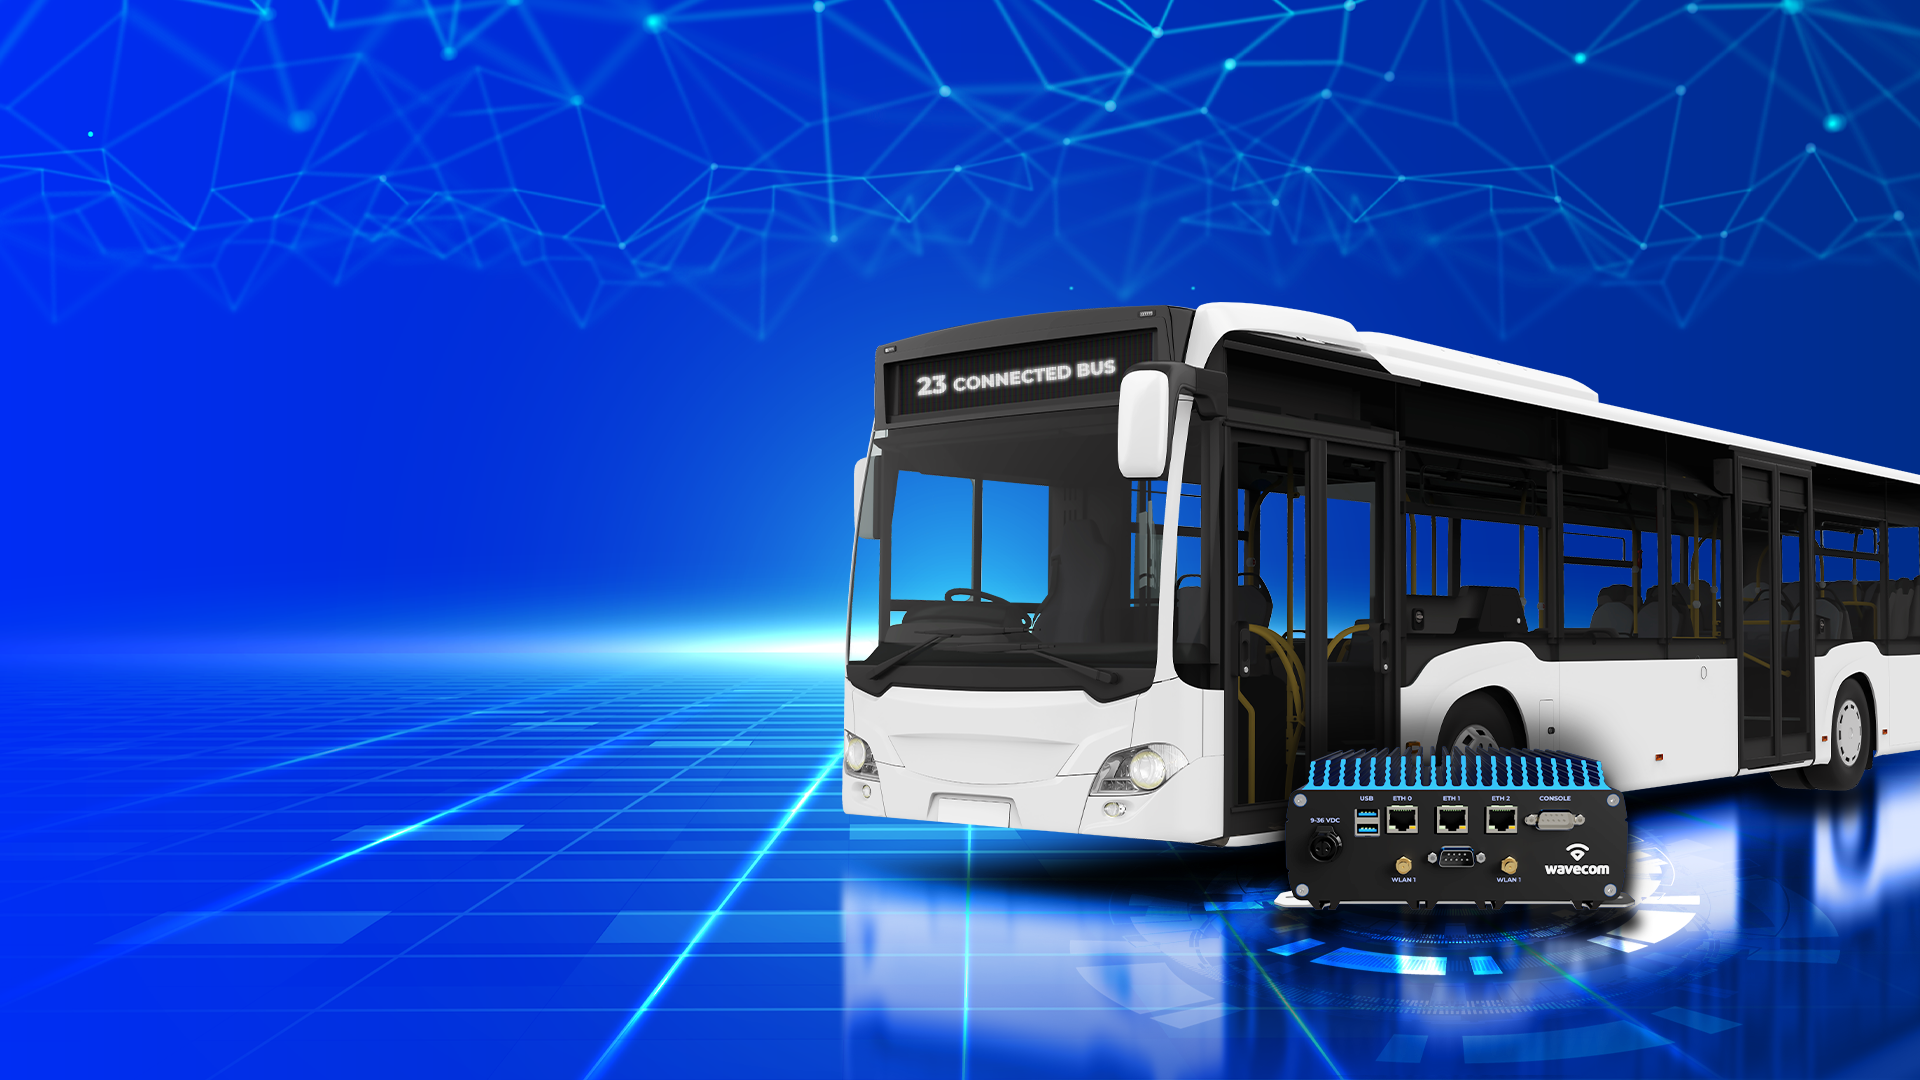 Connected Bus By Wavecom